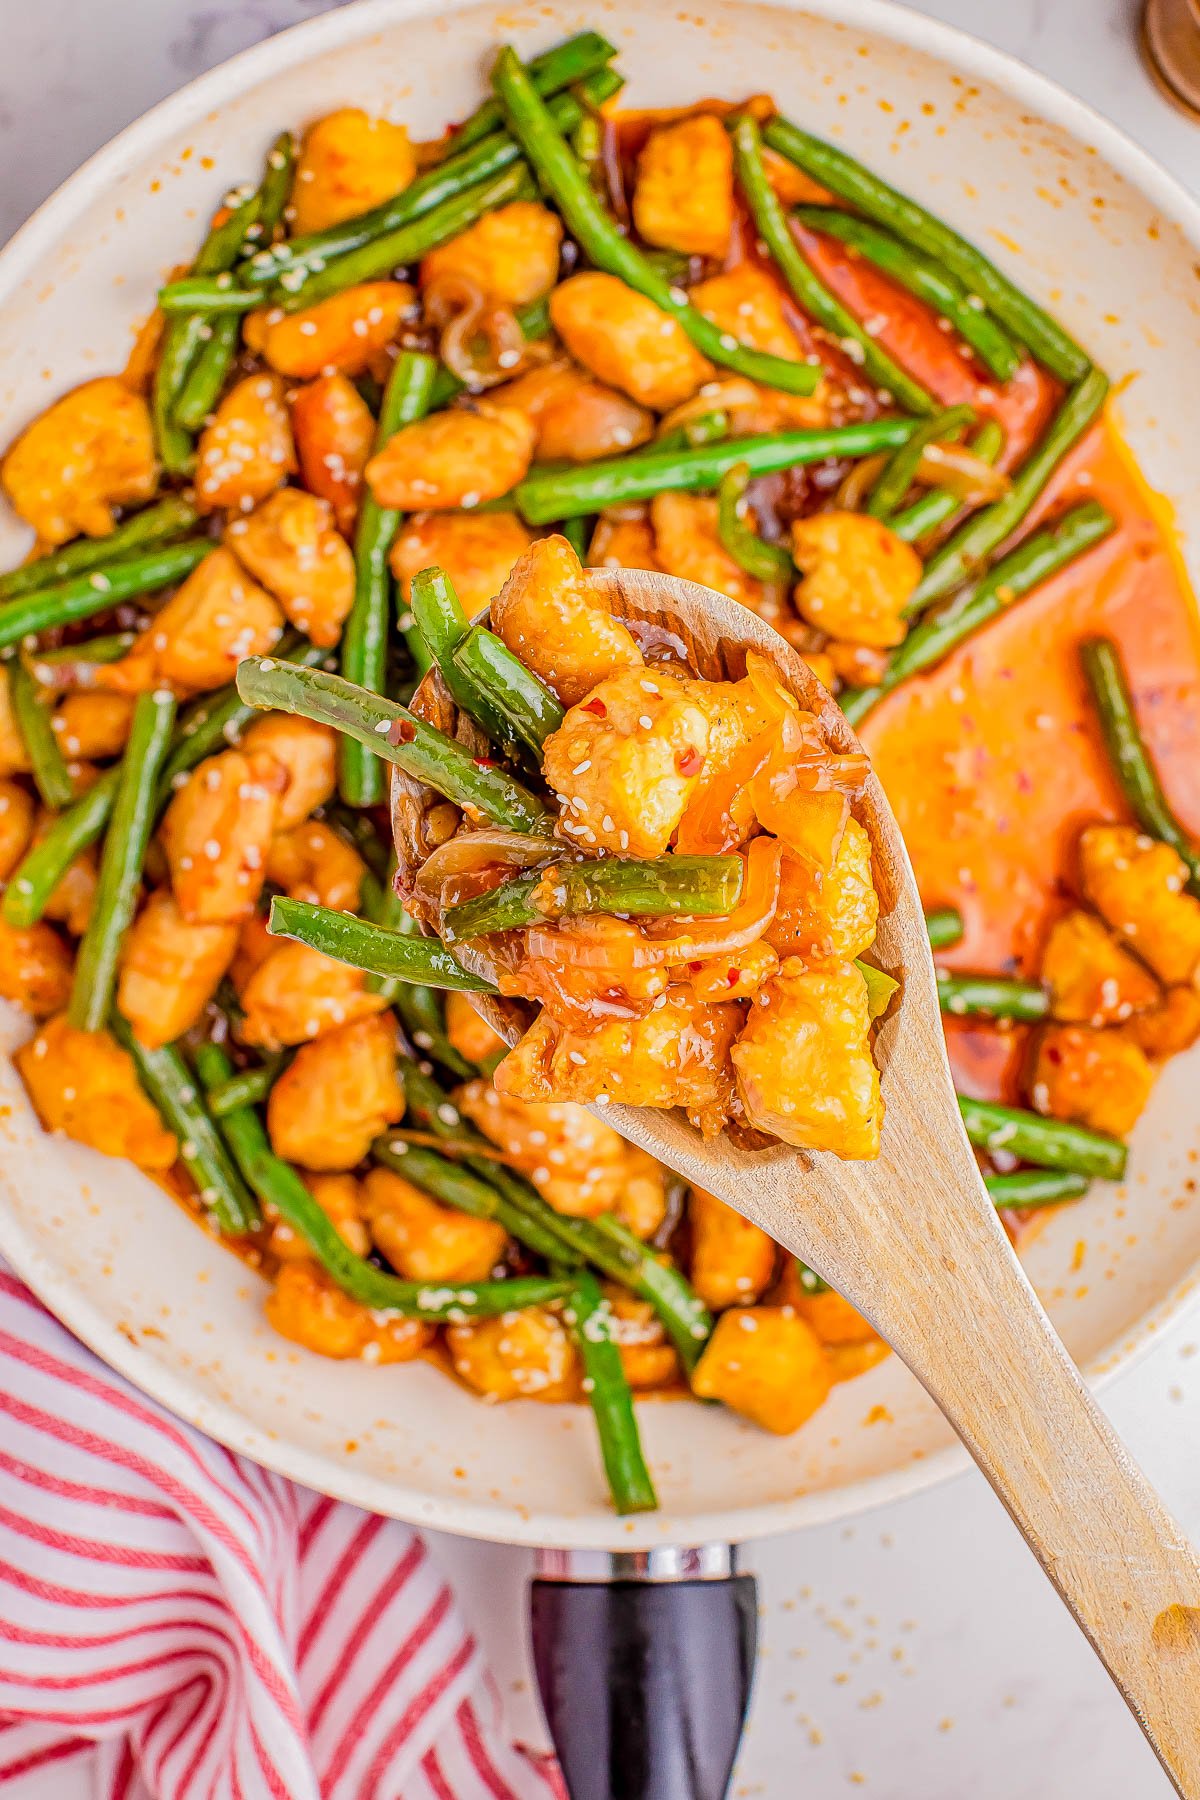 A wooden spoon holds a serving of stir-fried chicken and green beans coated in a glossy sauce, over a pan with more of the meal visible.